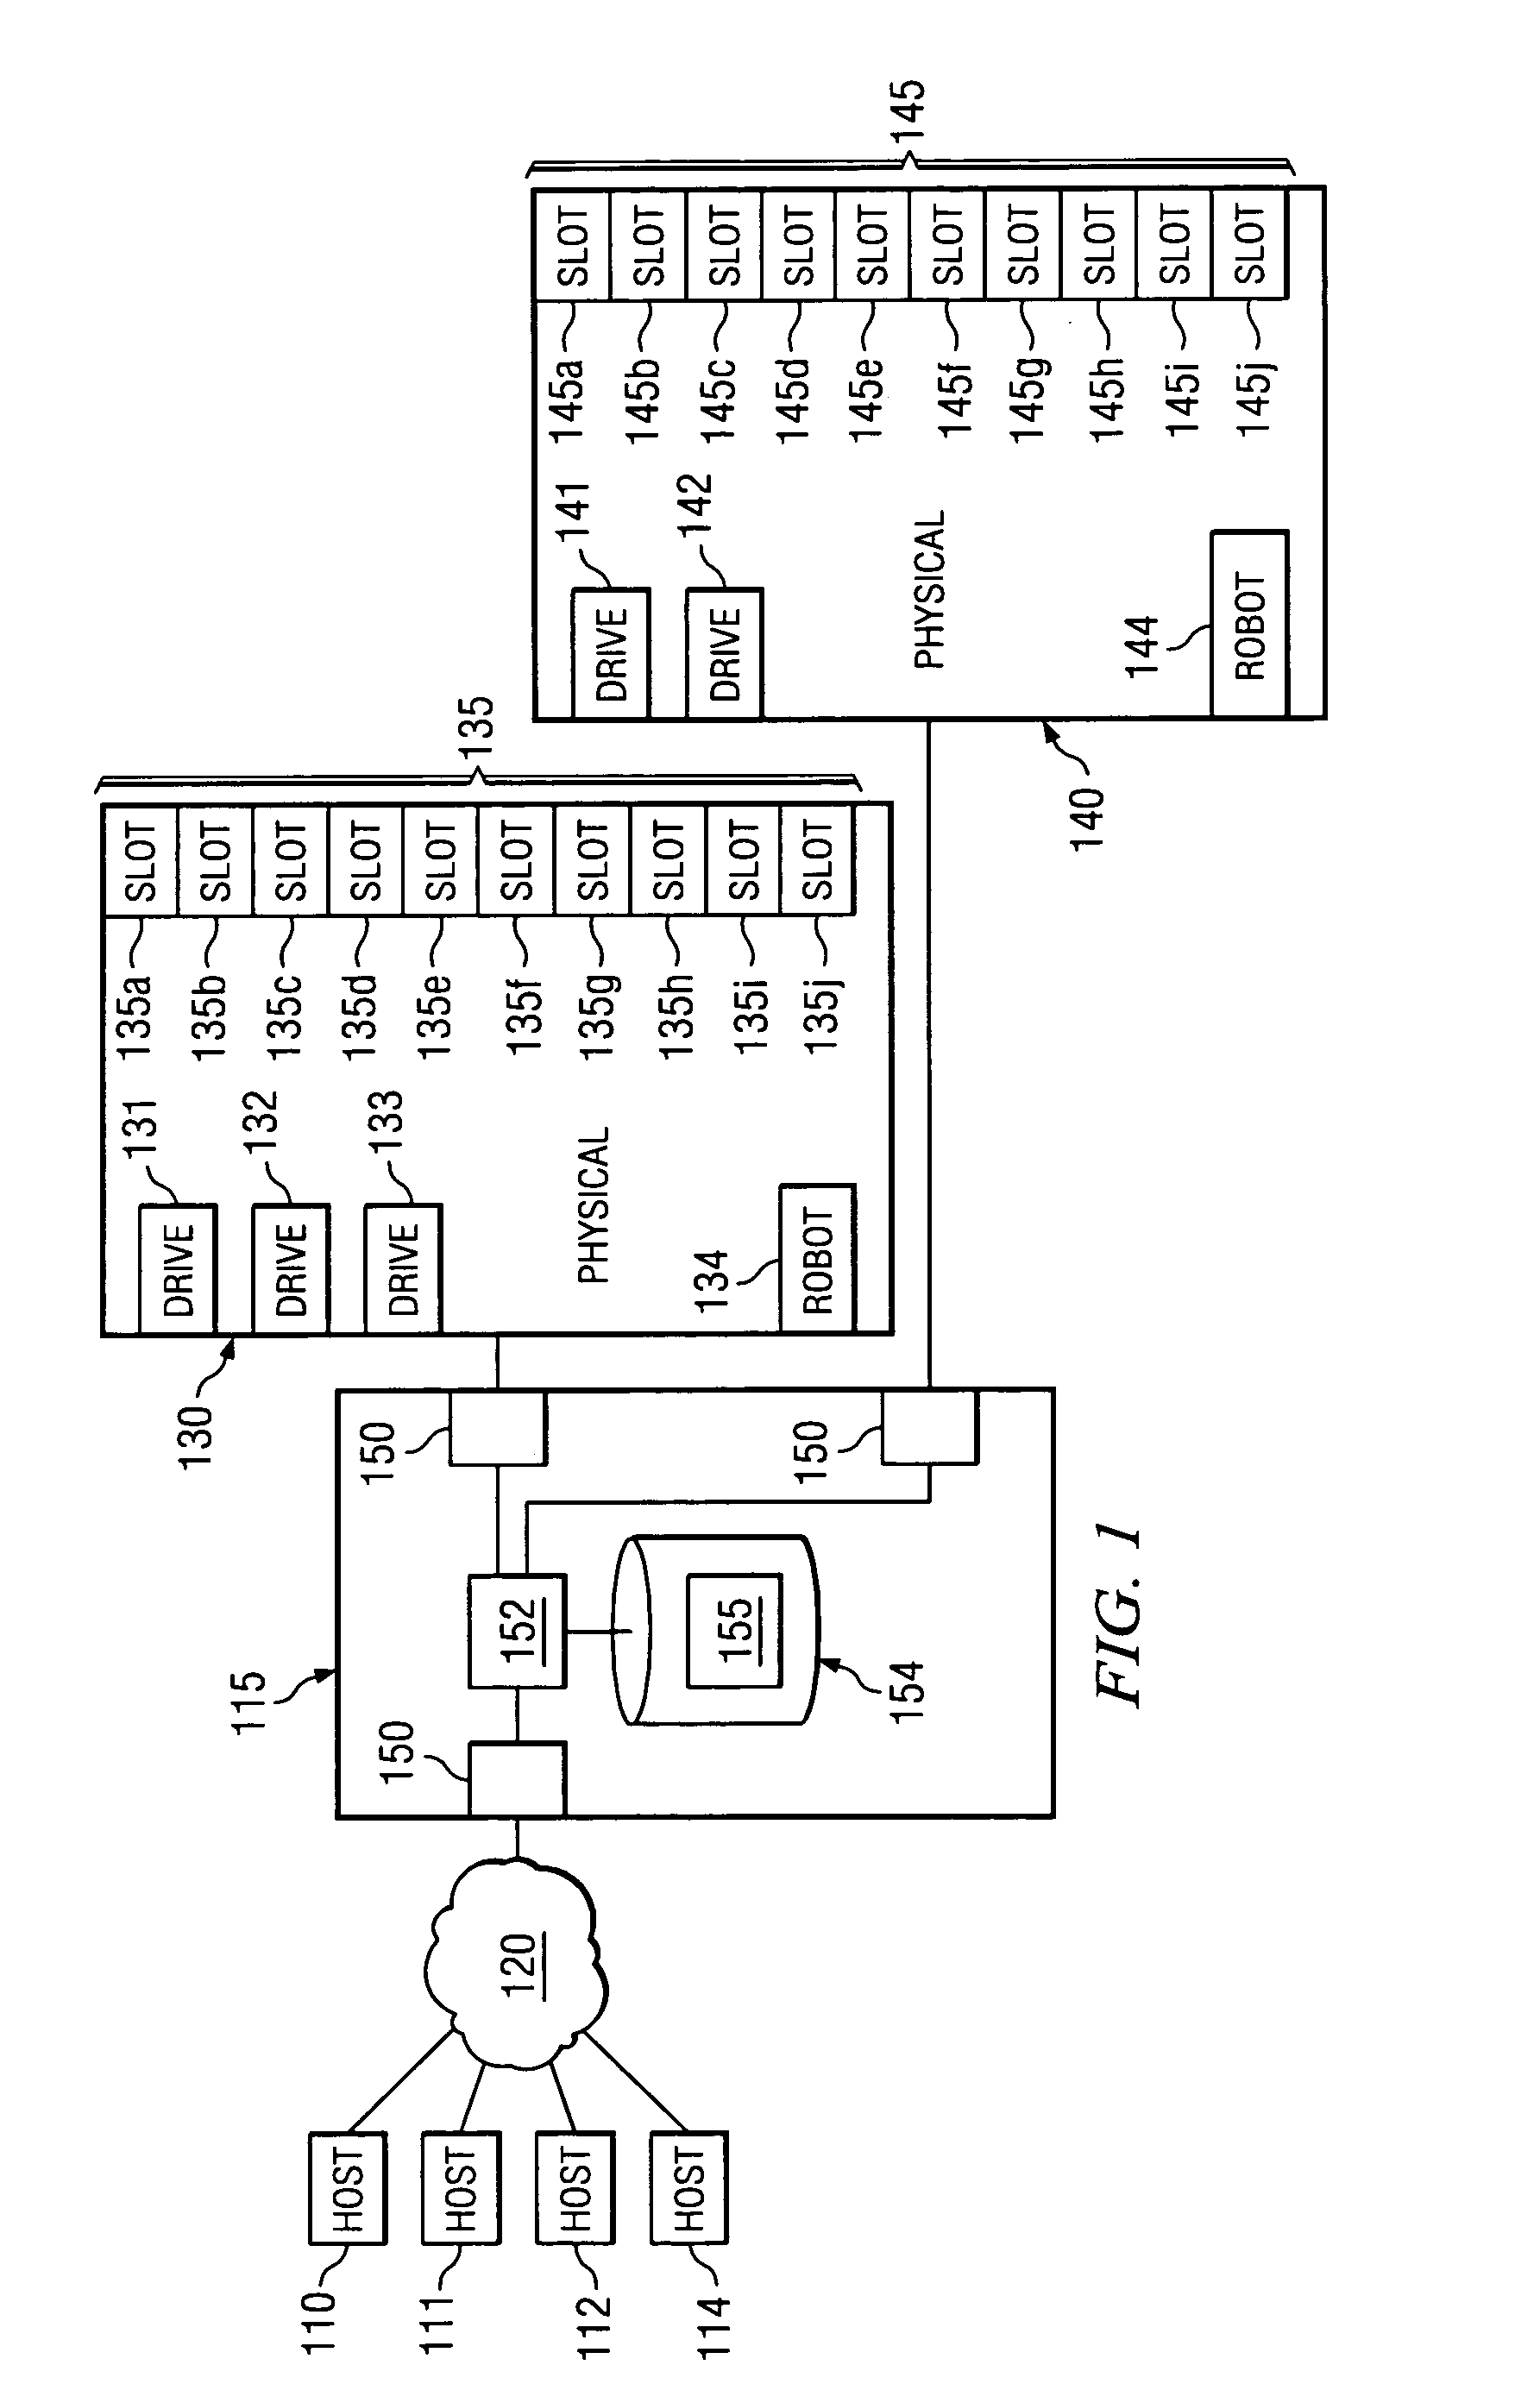 System and method for controlling access to multiple physical media libraries